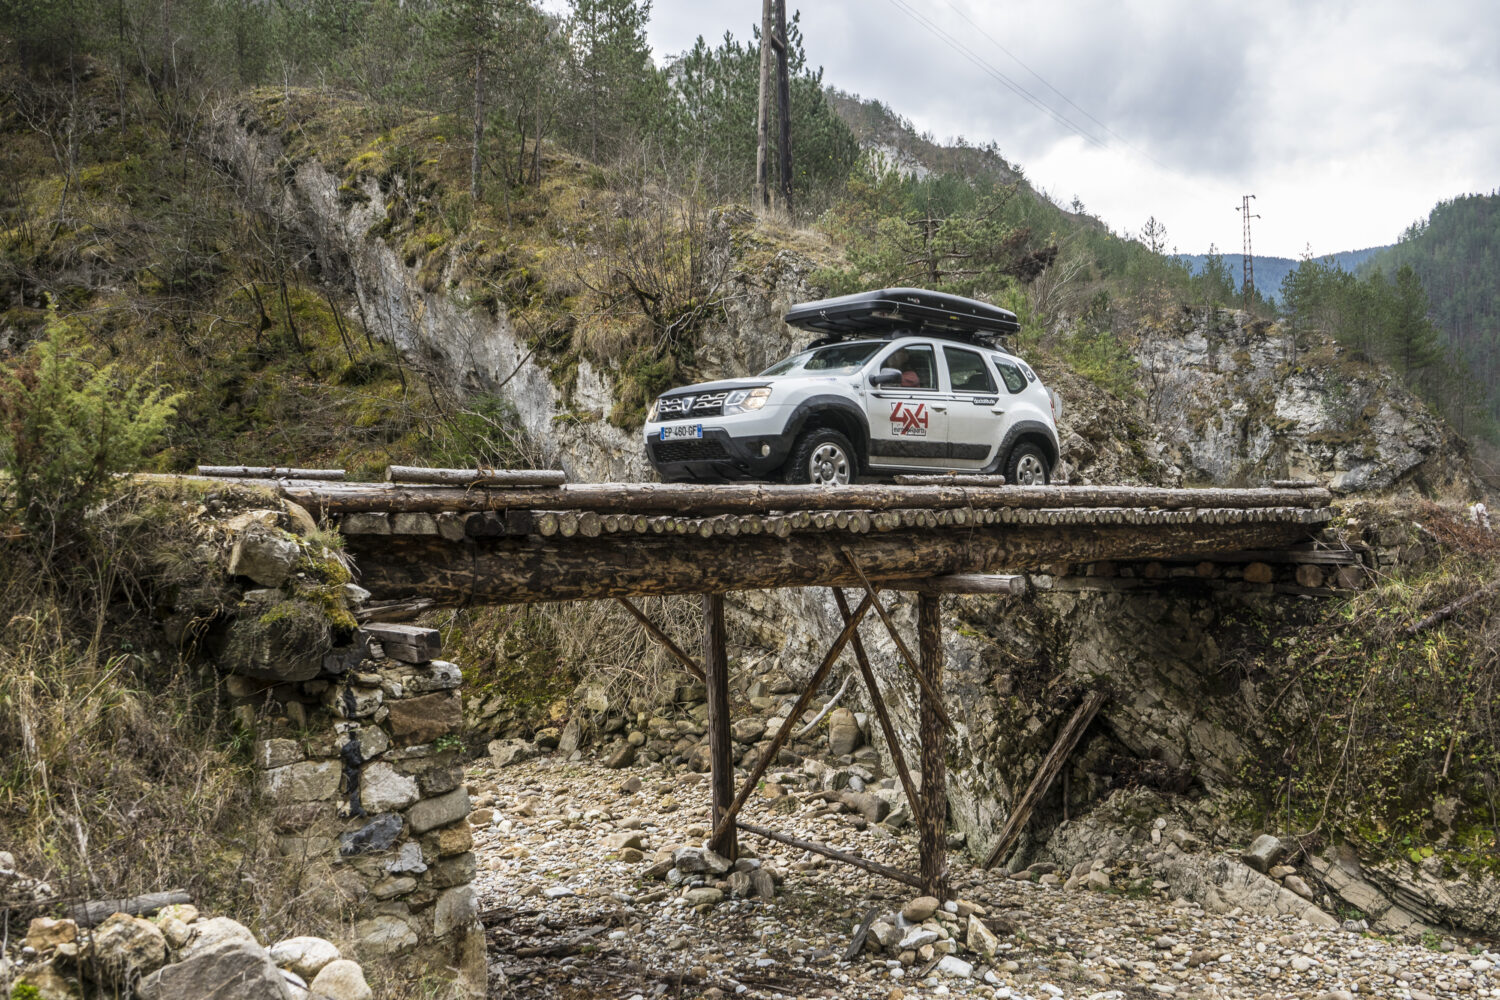 2022 - Story Dacia - 2 million Duster: behind the scenes of a success story.jpeg